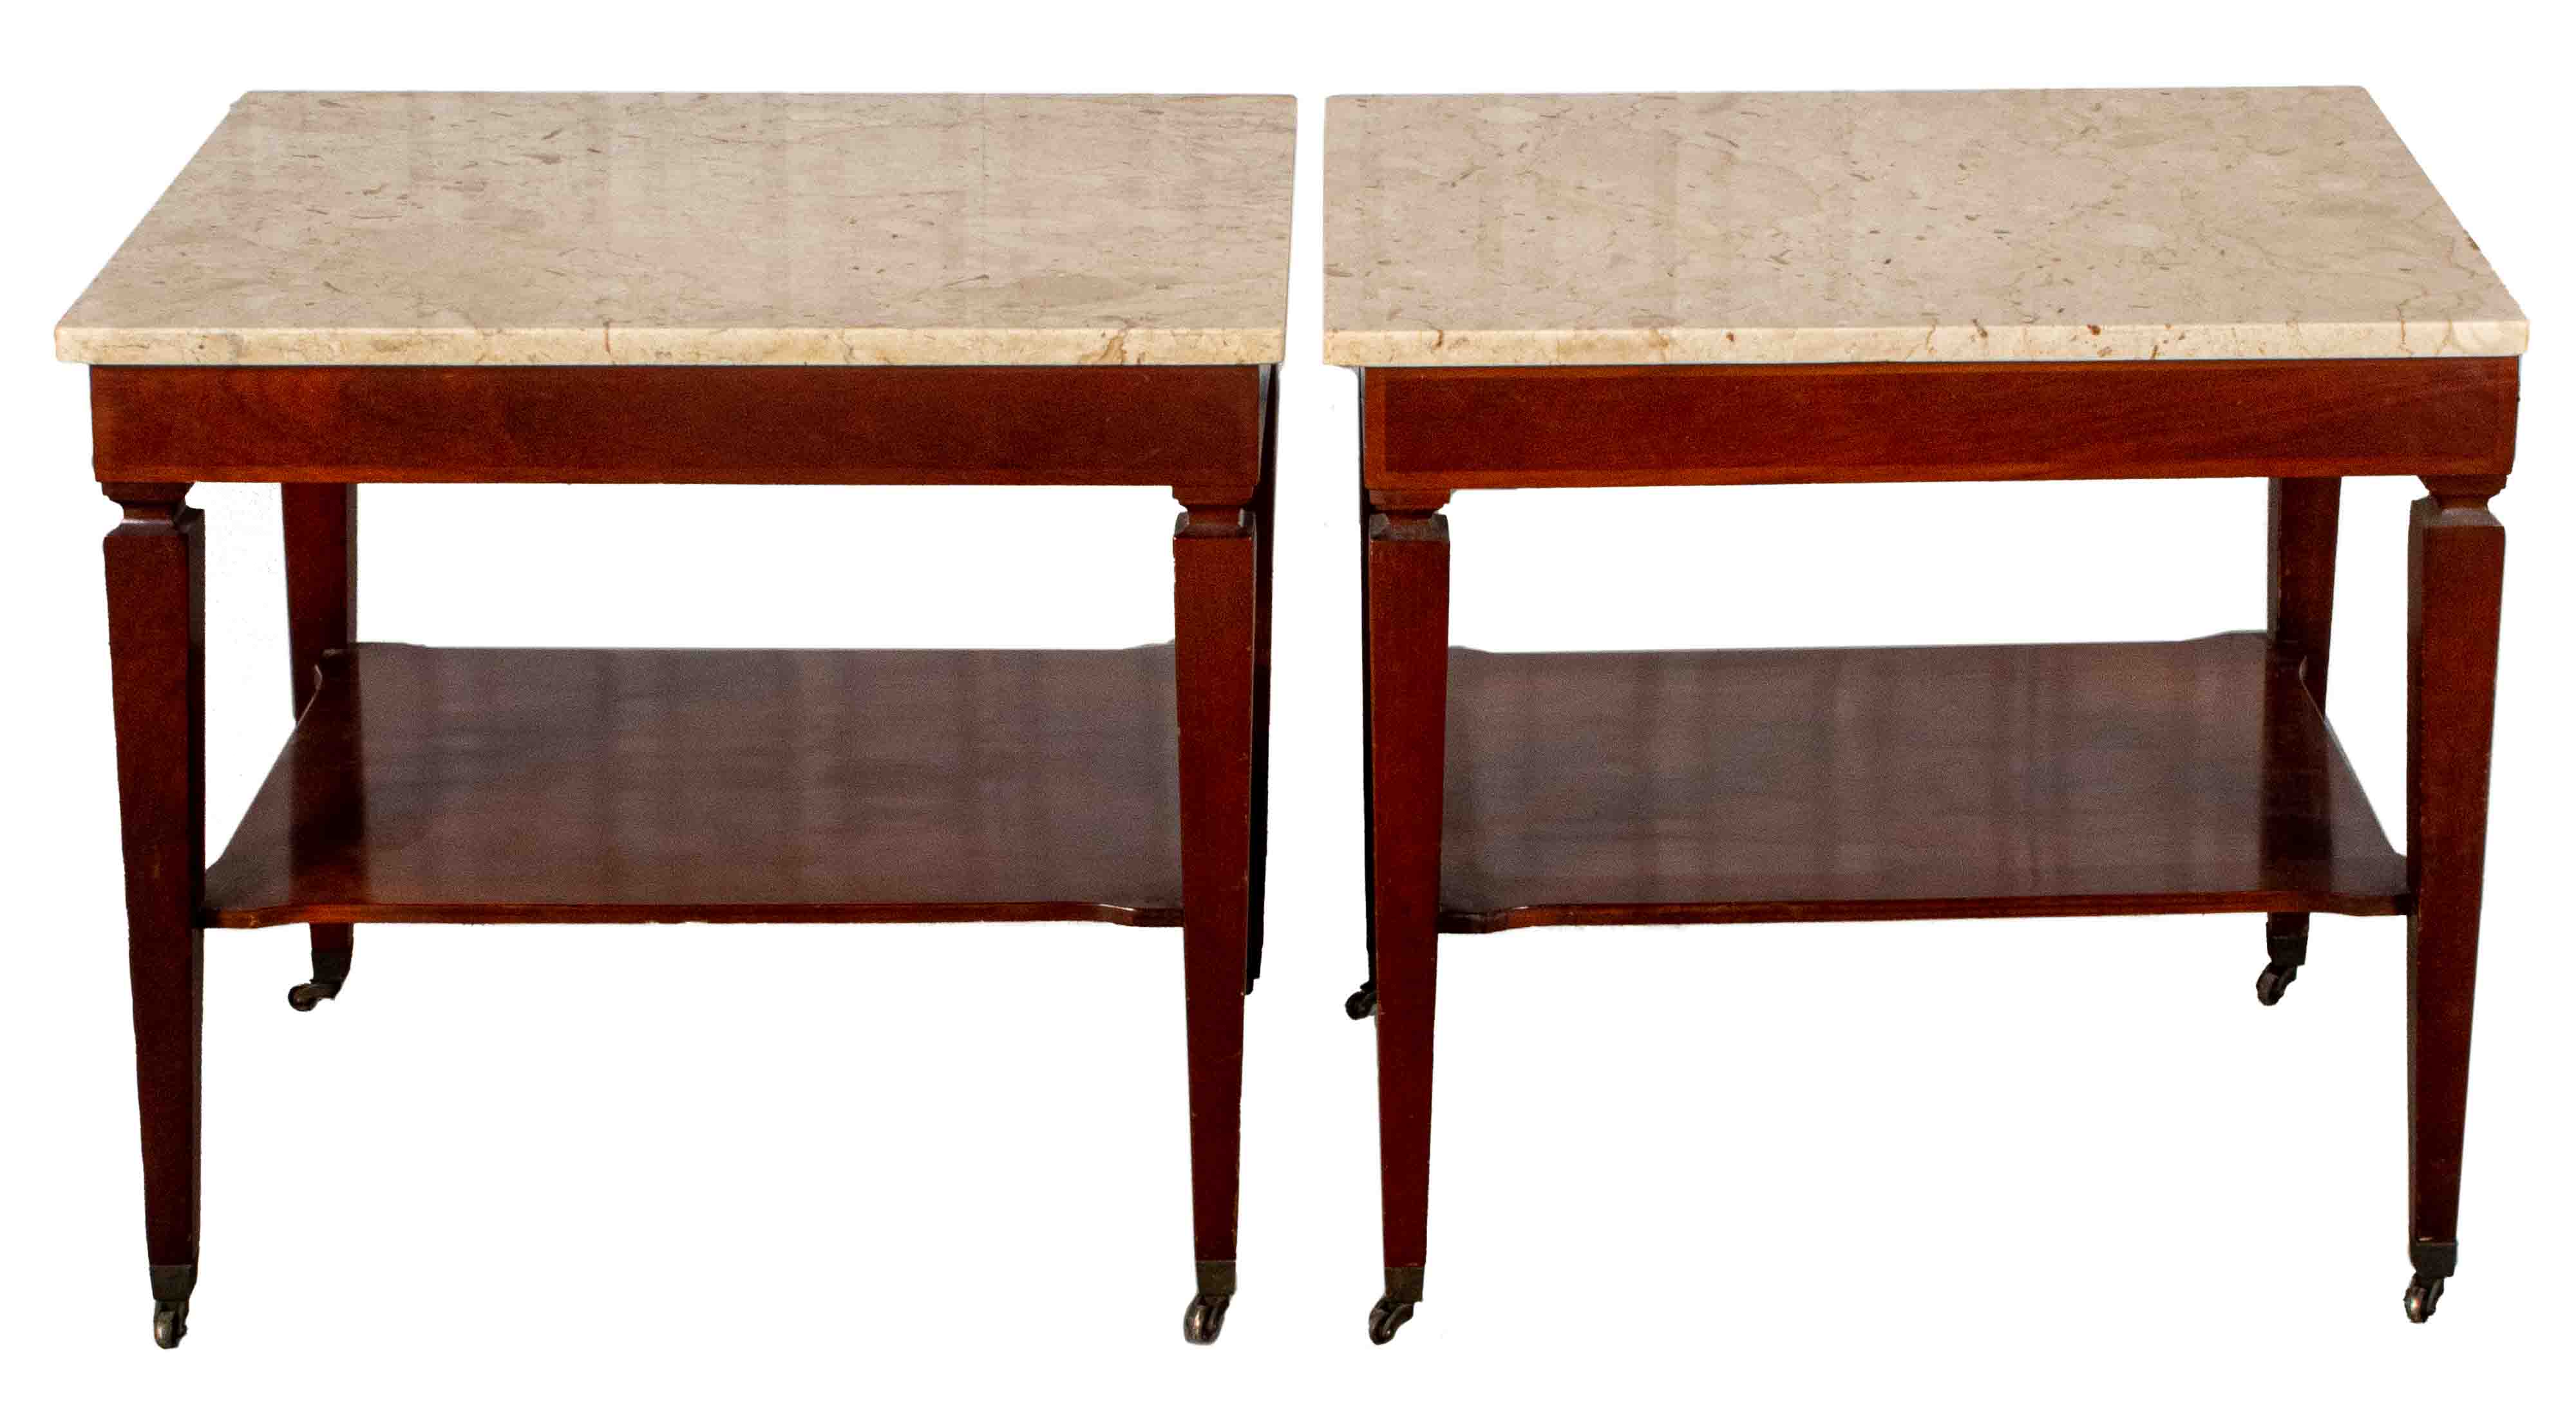 NEOCLASSICAL REVIVAL SIDE TABLES 2d1ed7